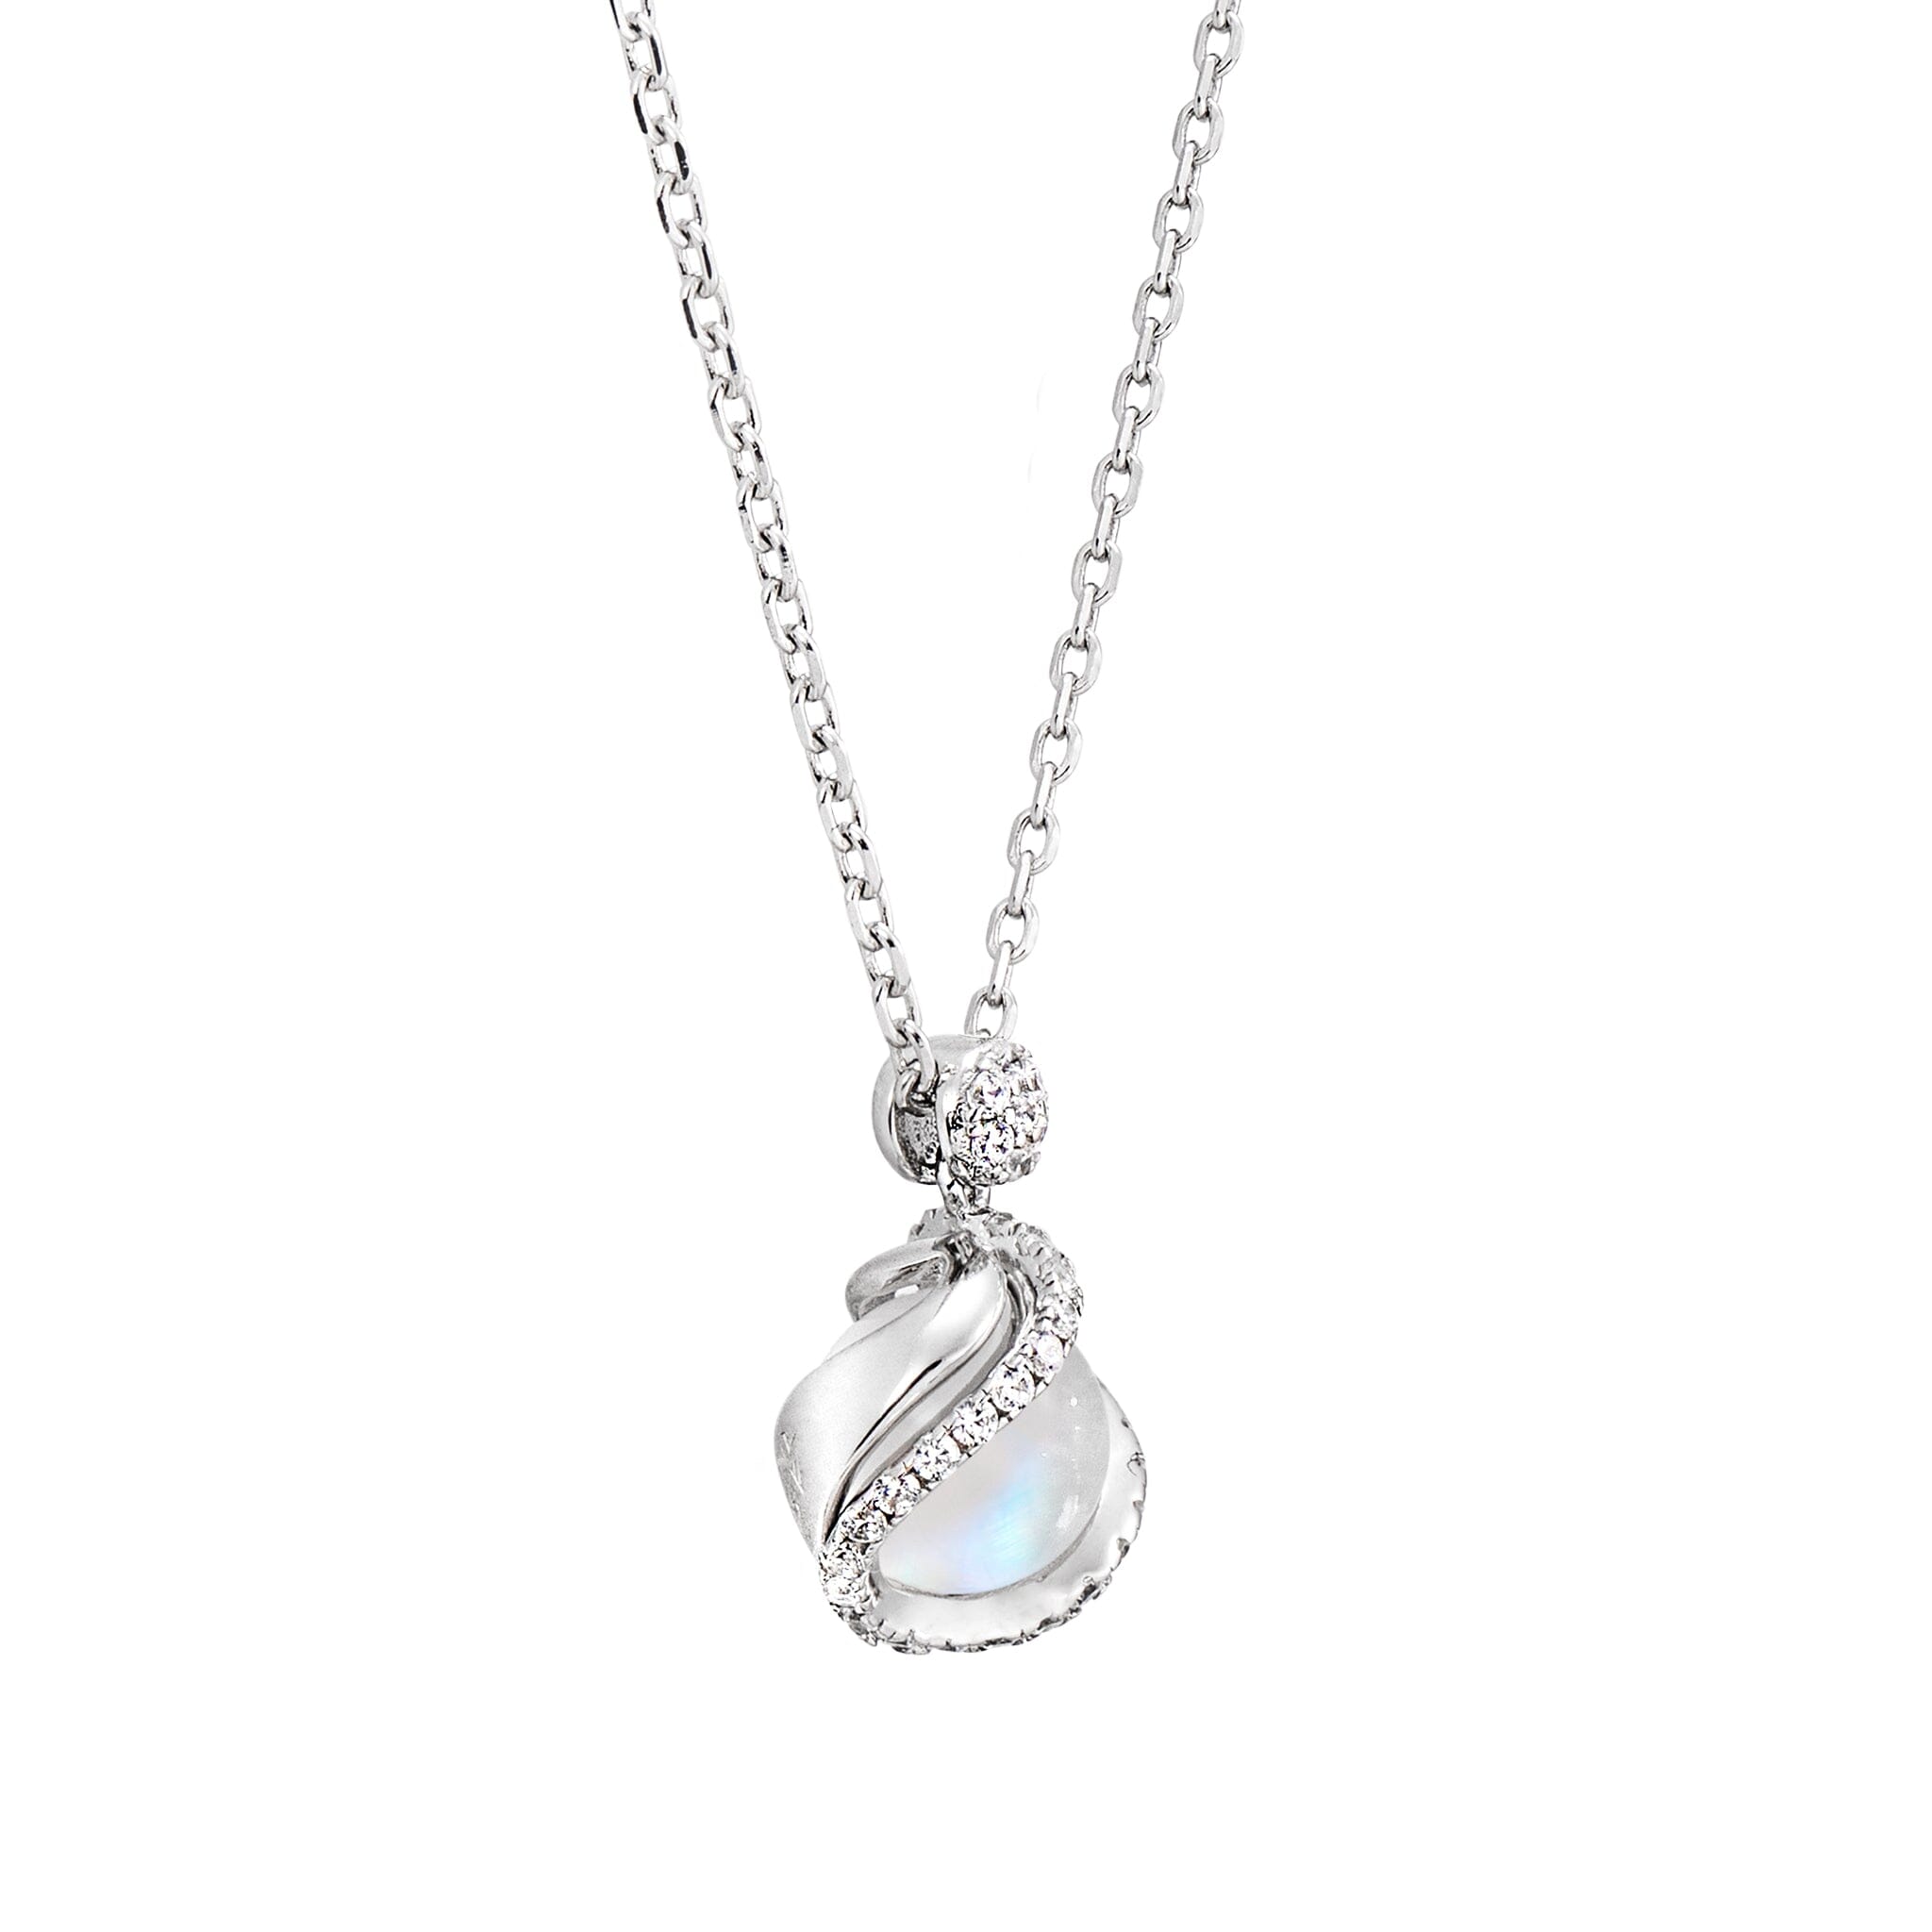 Women's Moving Ball Necklace with Moonstone Necklaces WAA FASHION GROUP 